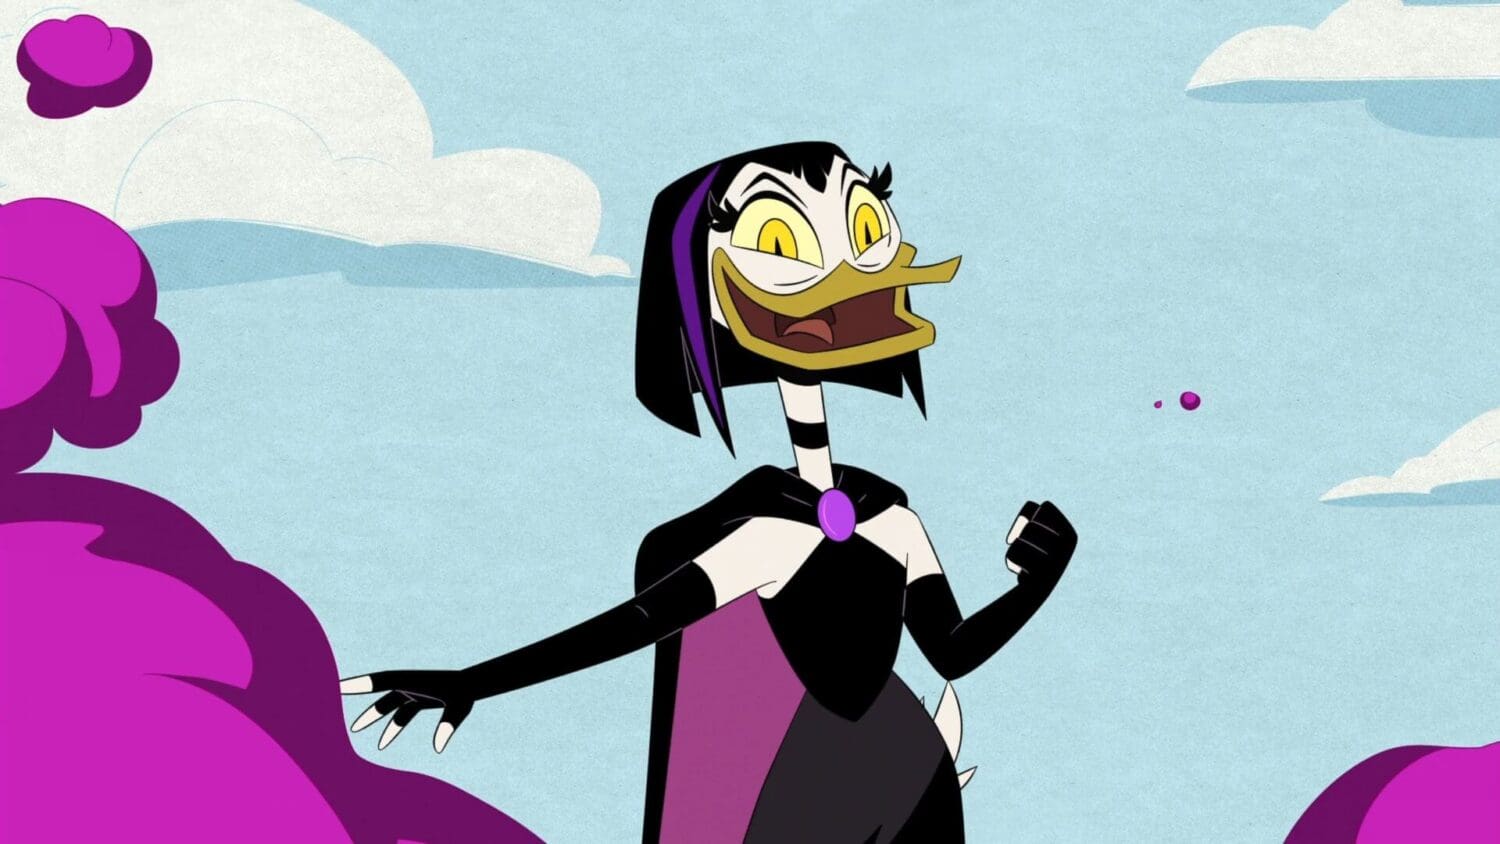 magica de spell appearances from duck tales